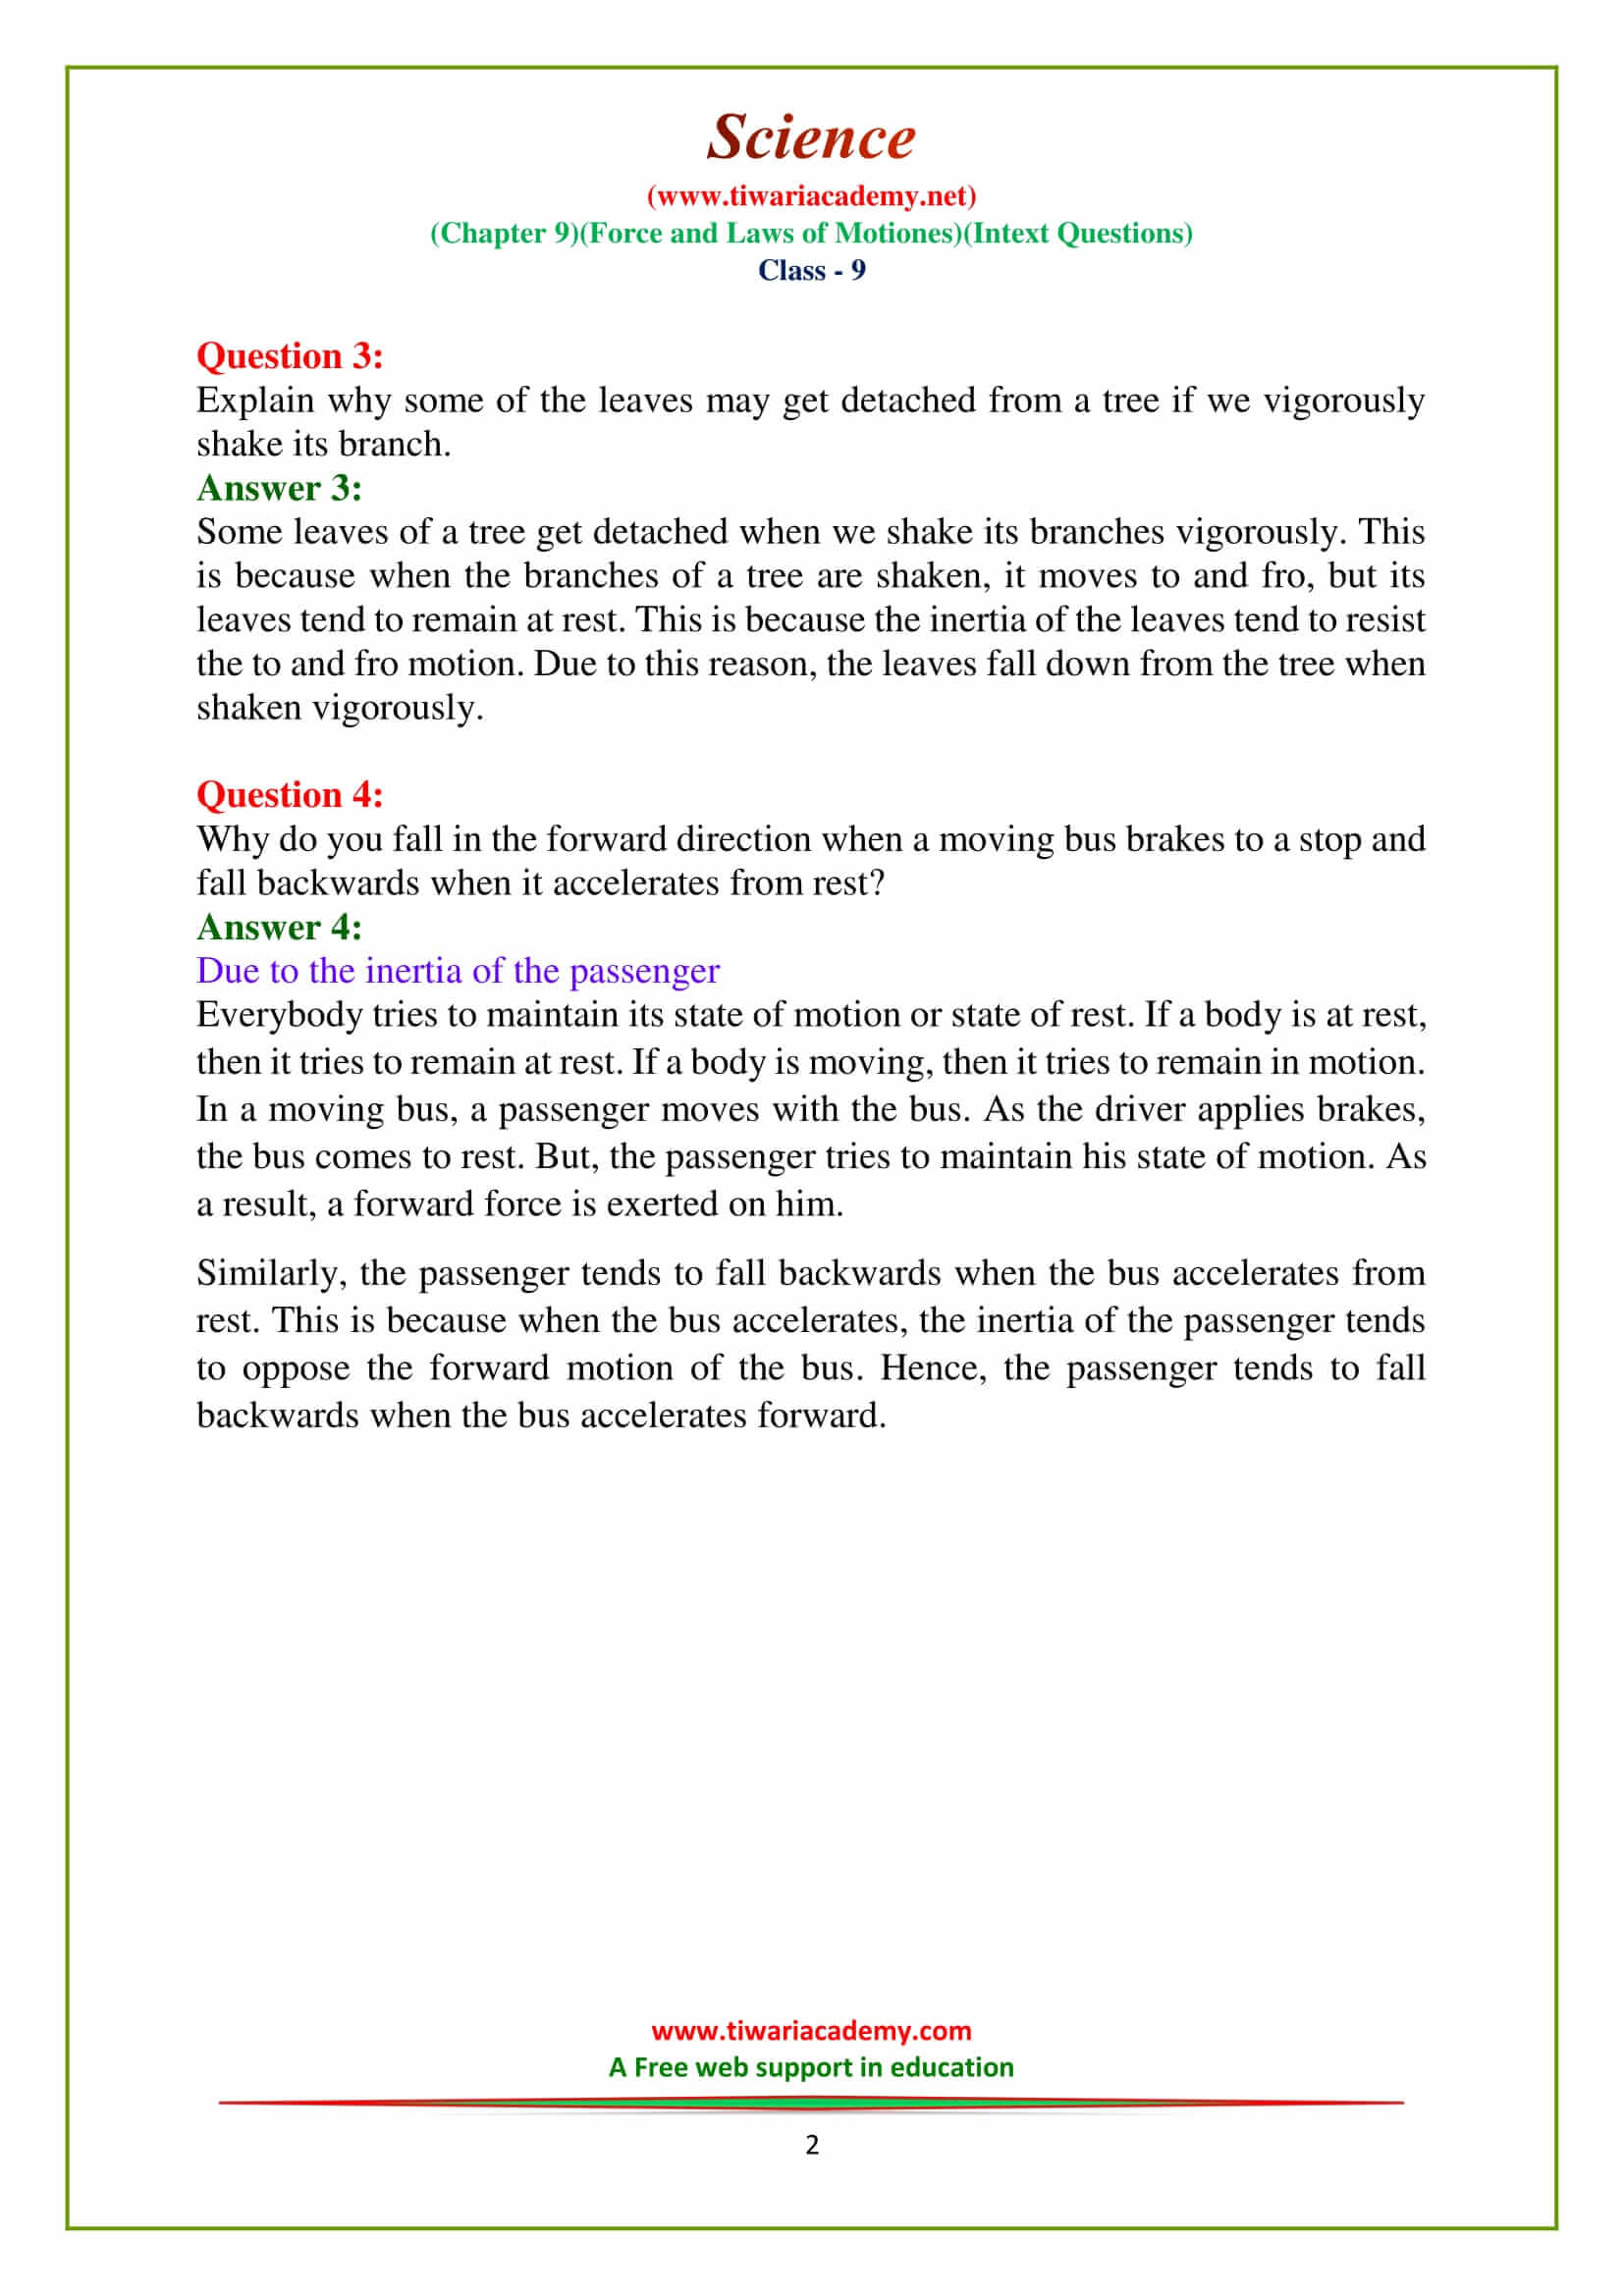 NCERT Solutions for Class 9 Science Chapter 9 force and laws of motion Intext questions on page 118 in pdf